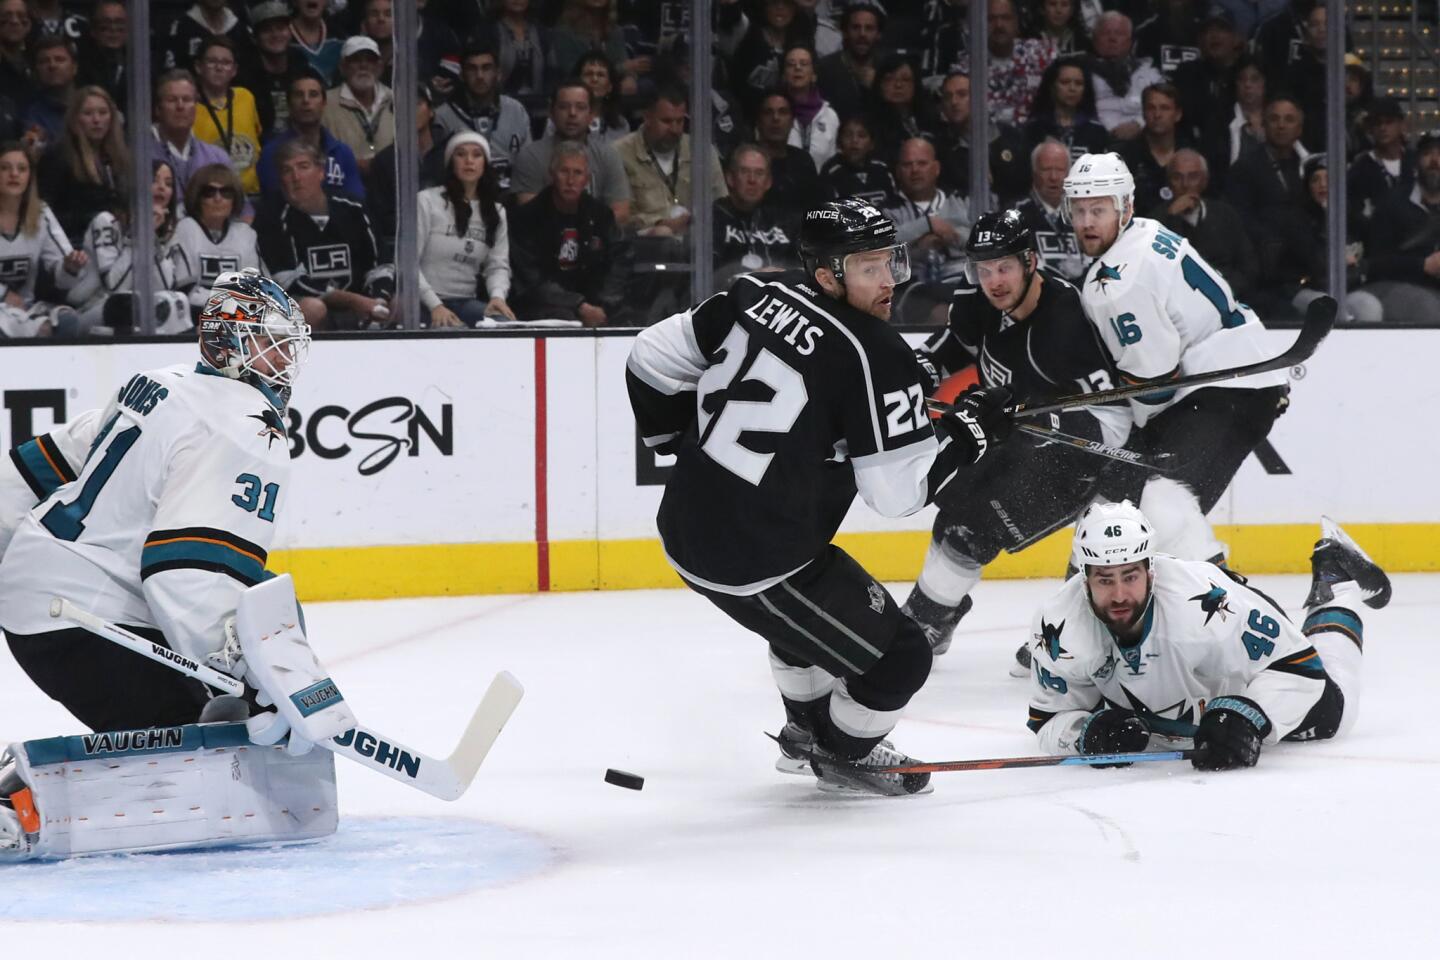 Kings eliminated from playoffs by San Jose Sharks in 6-3 loss